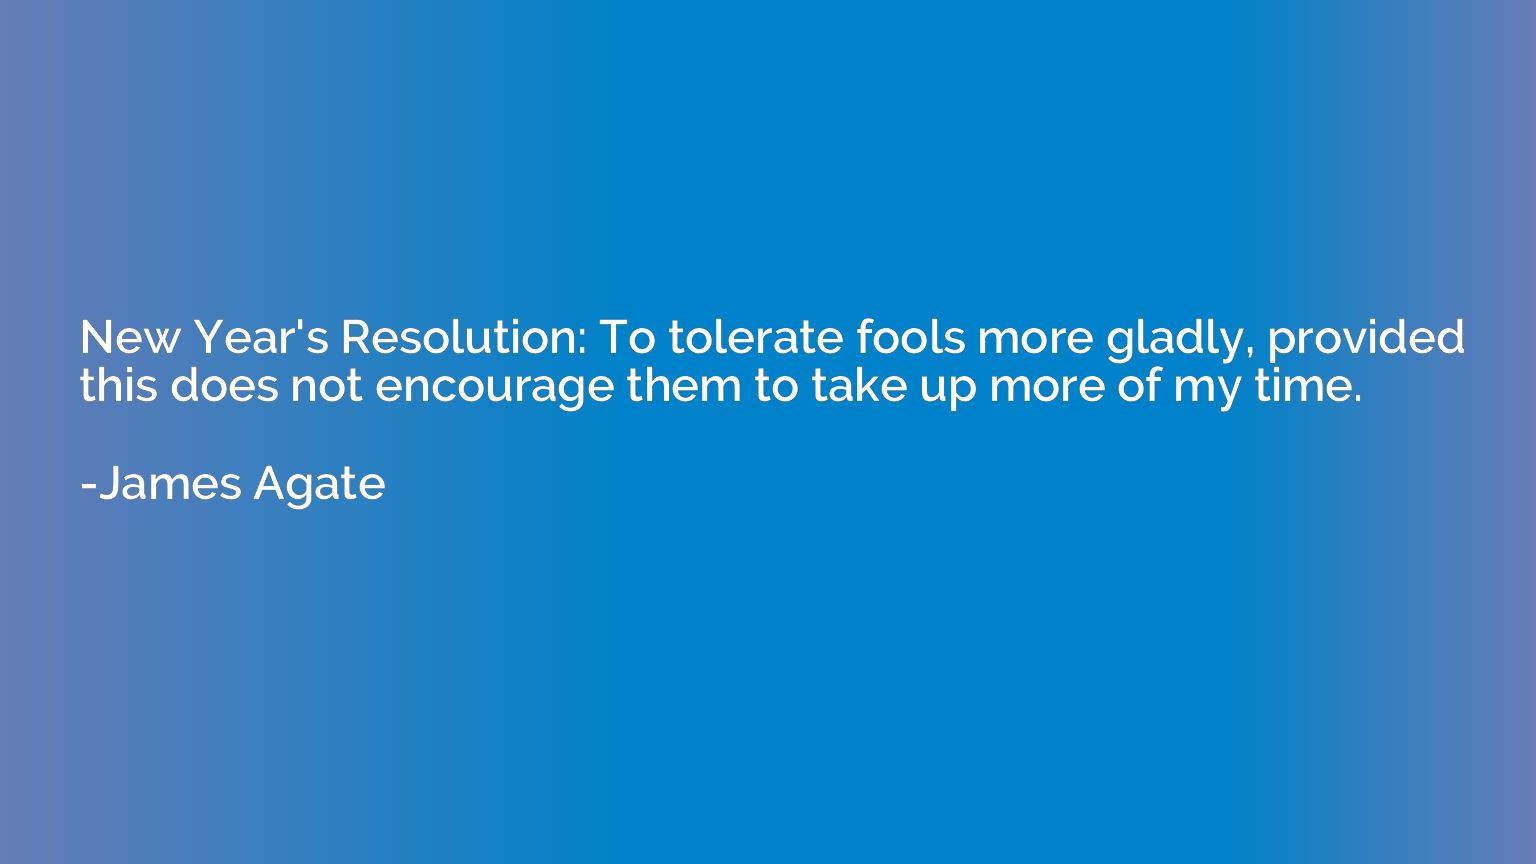 New Year's Resolution: To tolerate fools more gladly, provid